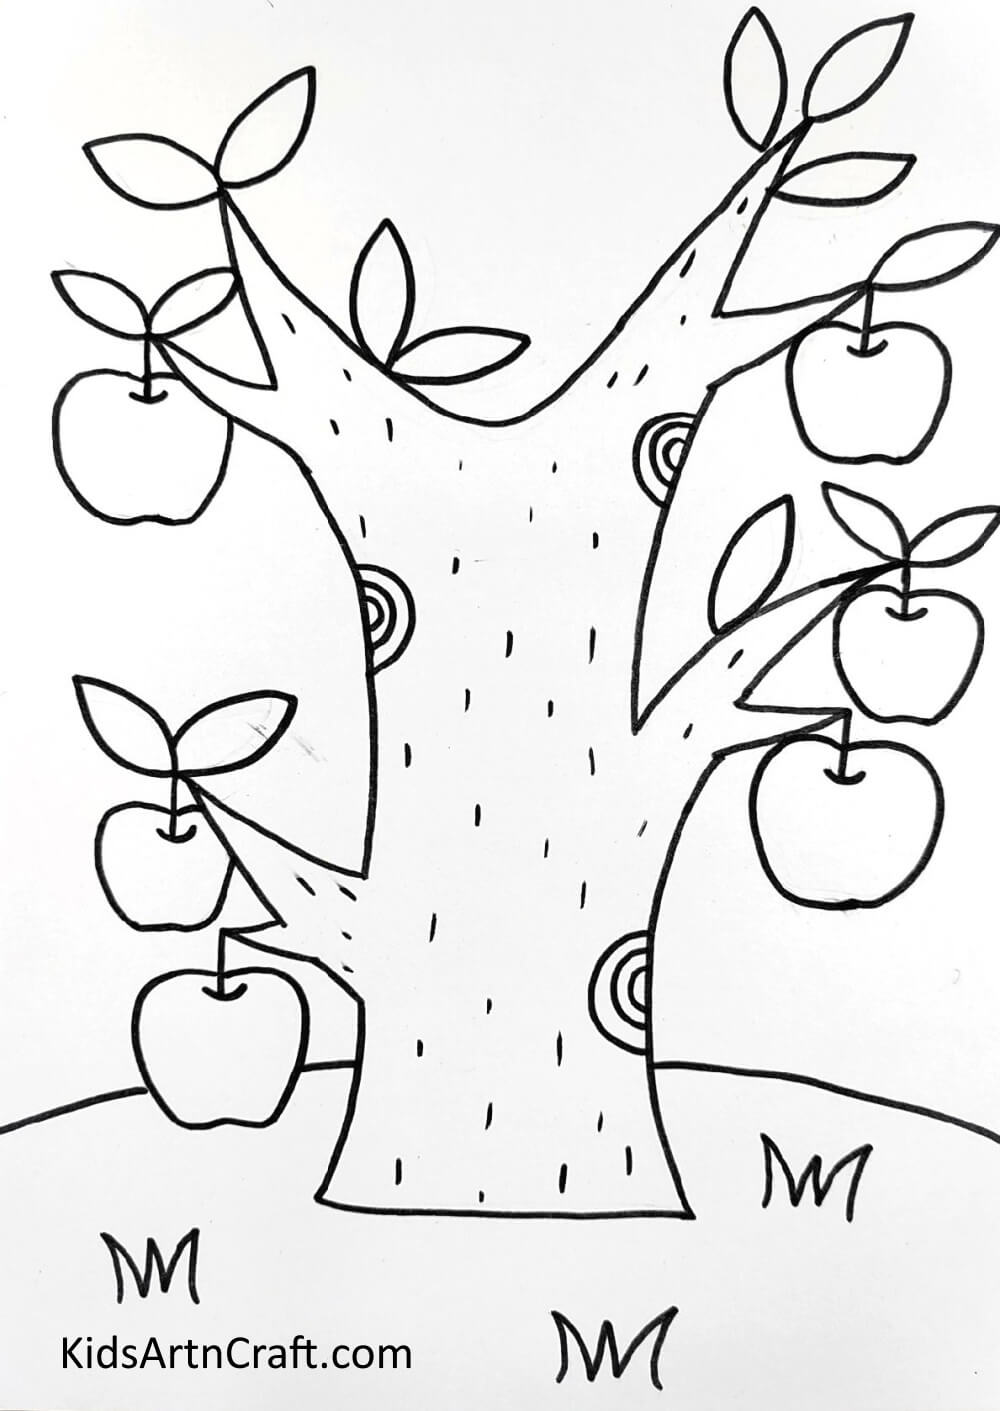 Drawing Leaves And Grass - An easy guide to draw a tree with apples